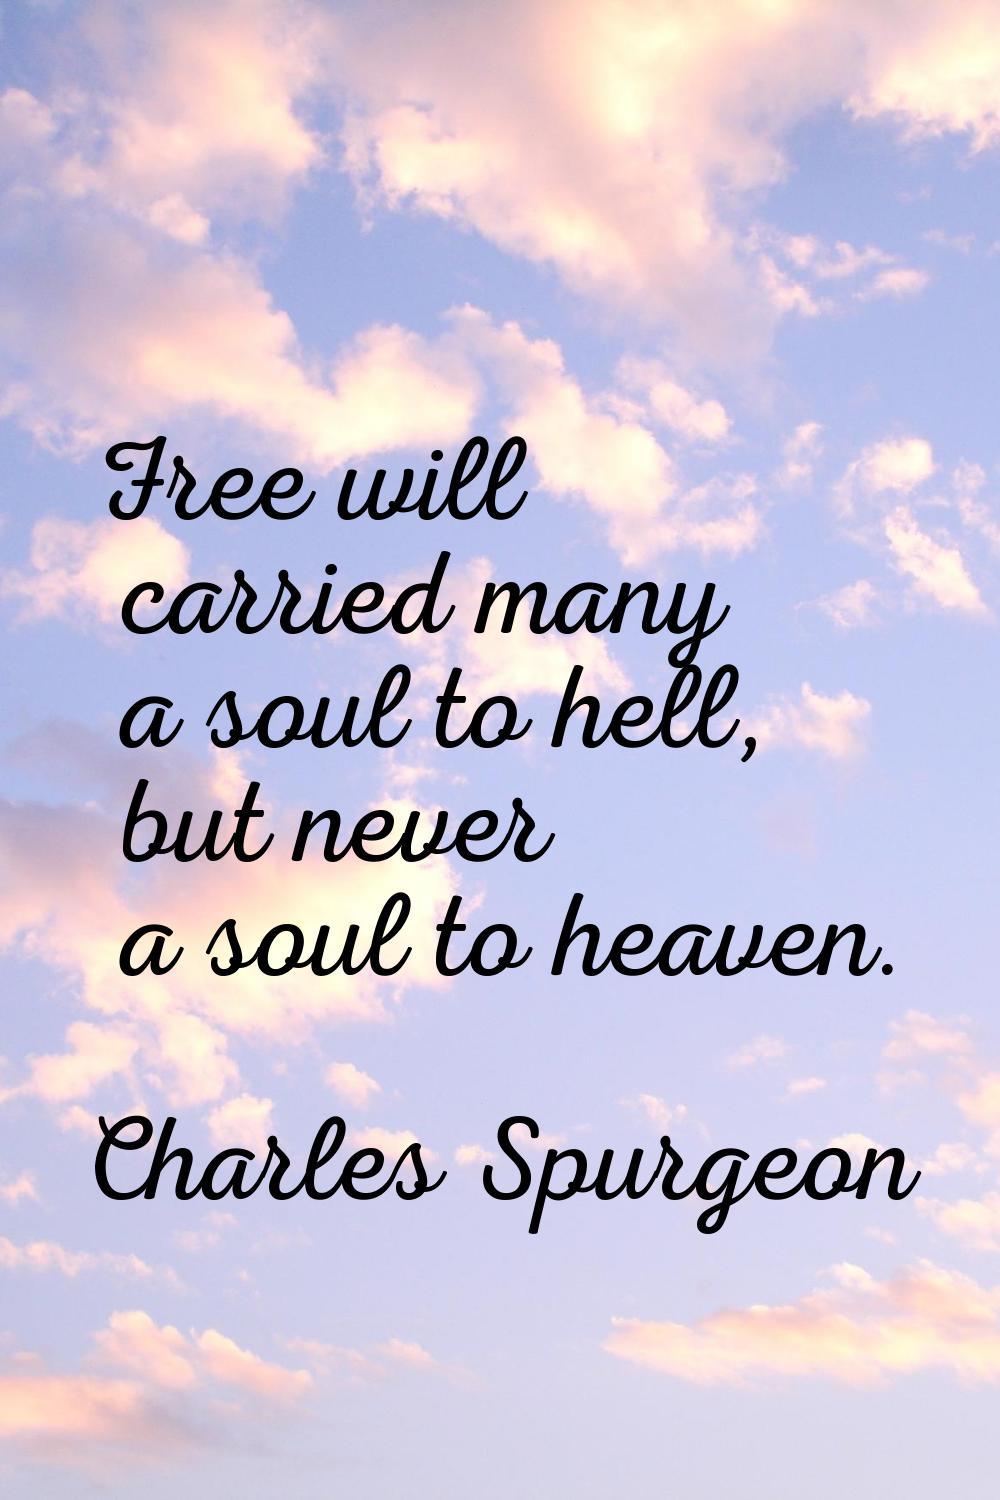 Free will carried many a soul to hell, but never a soul to heaven.